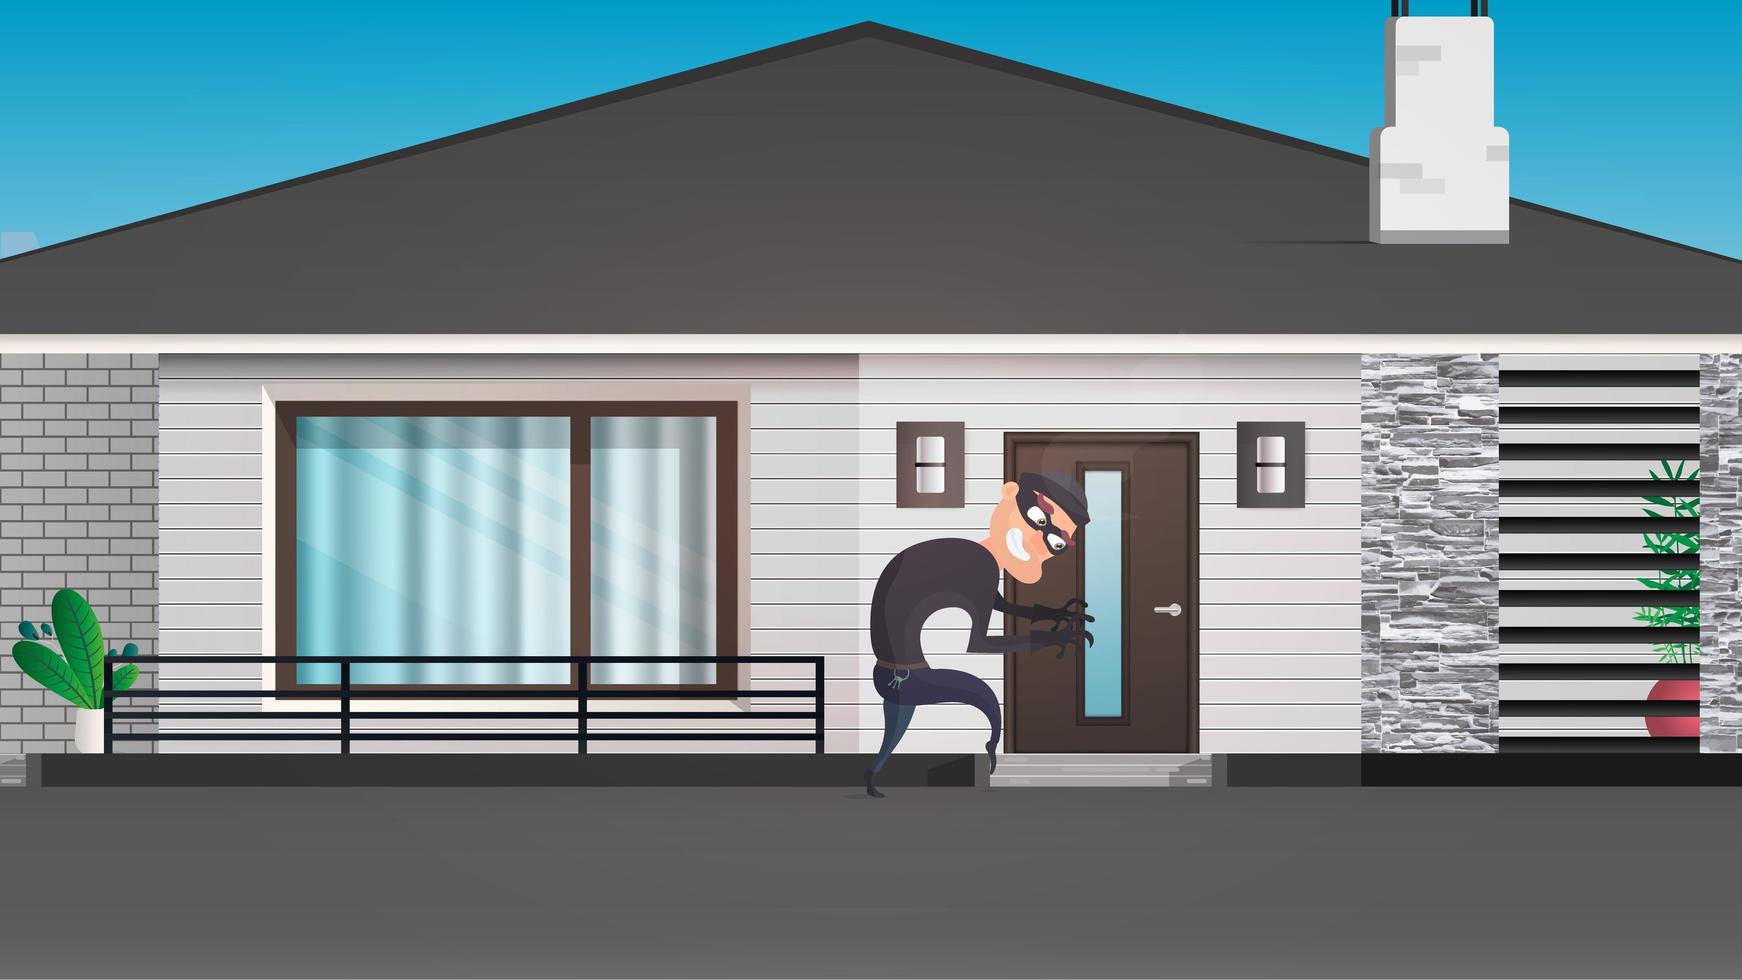 A thief sneaks into the house. The robber is trying to crack the door. Sign of robbery. Security concept. Vector illustration.